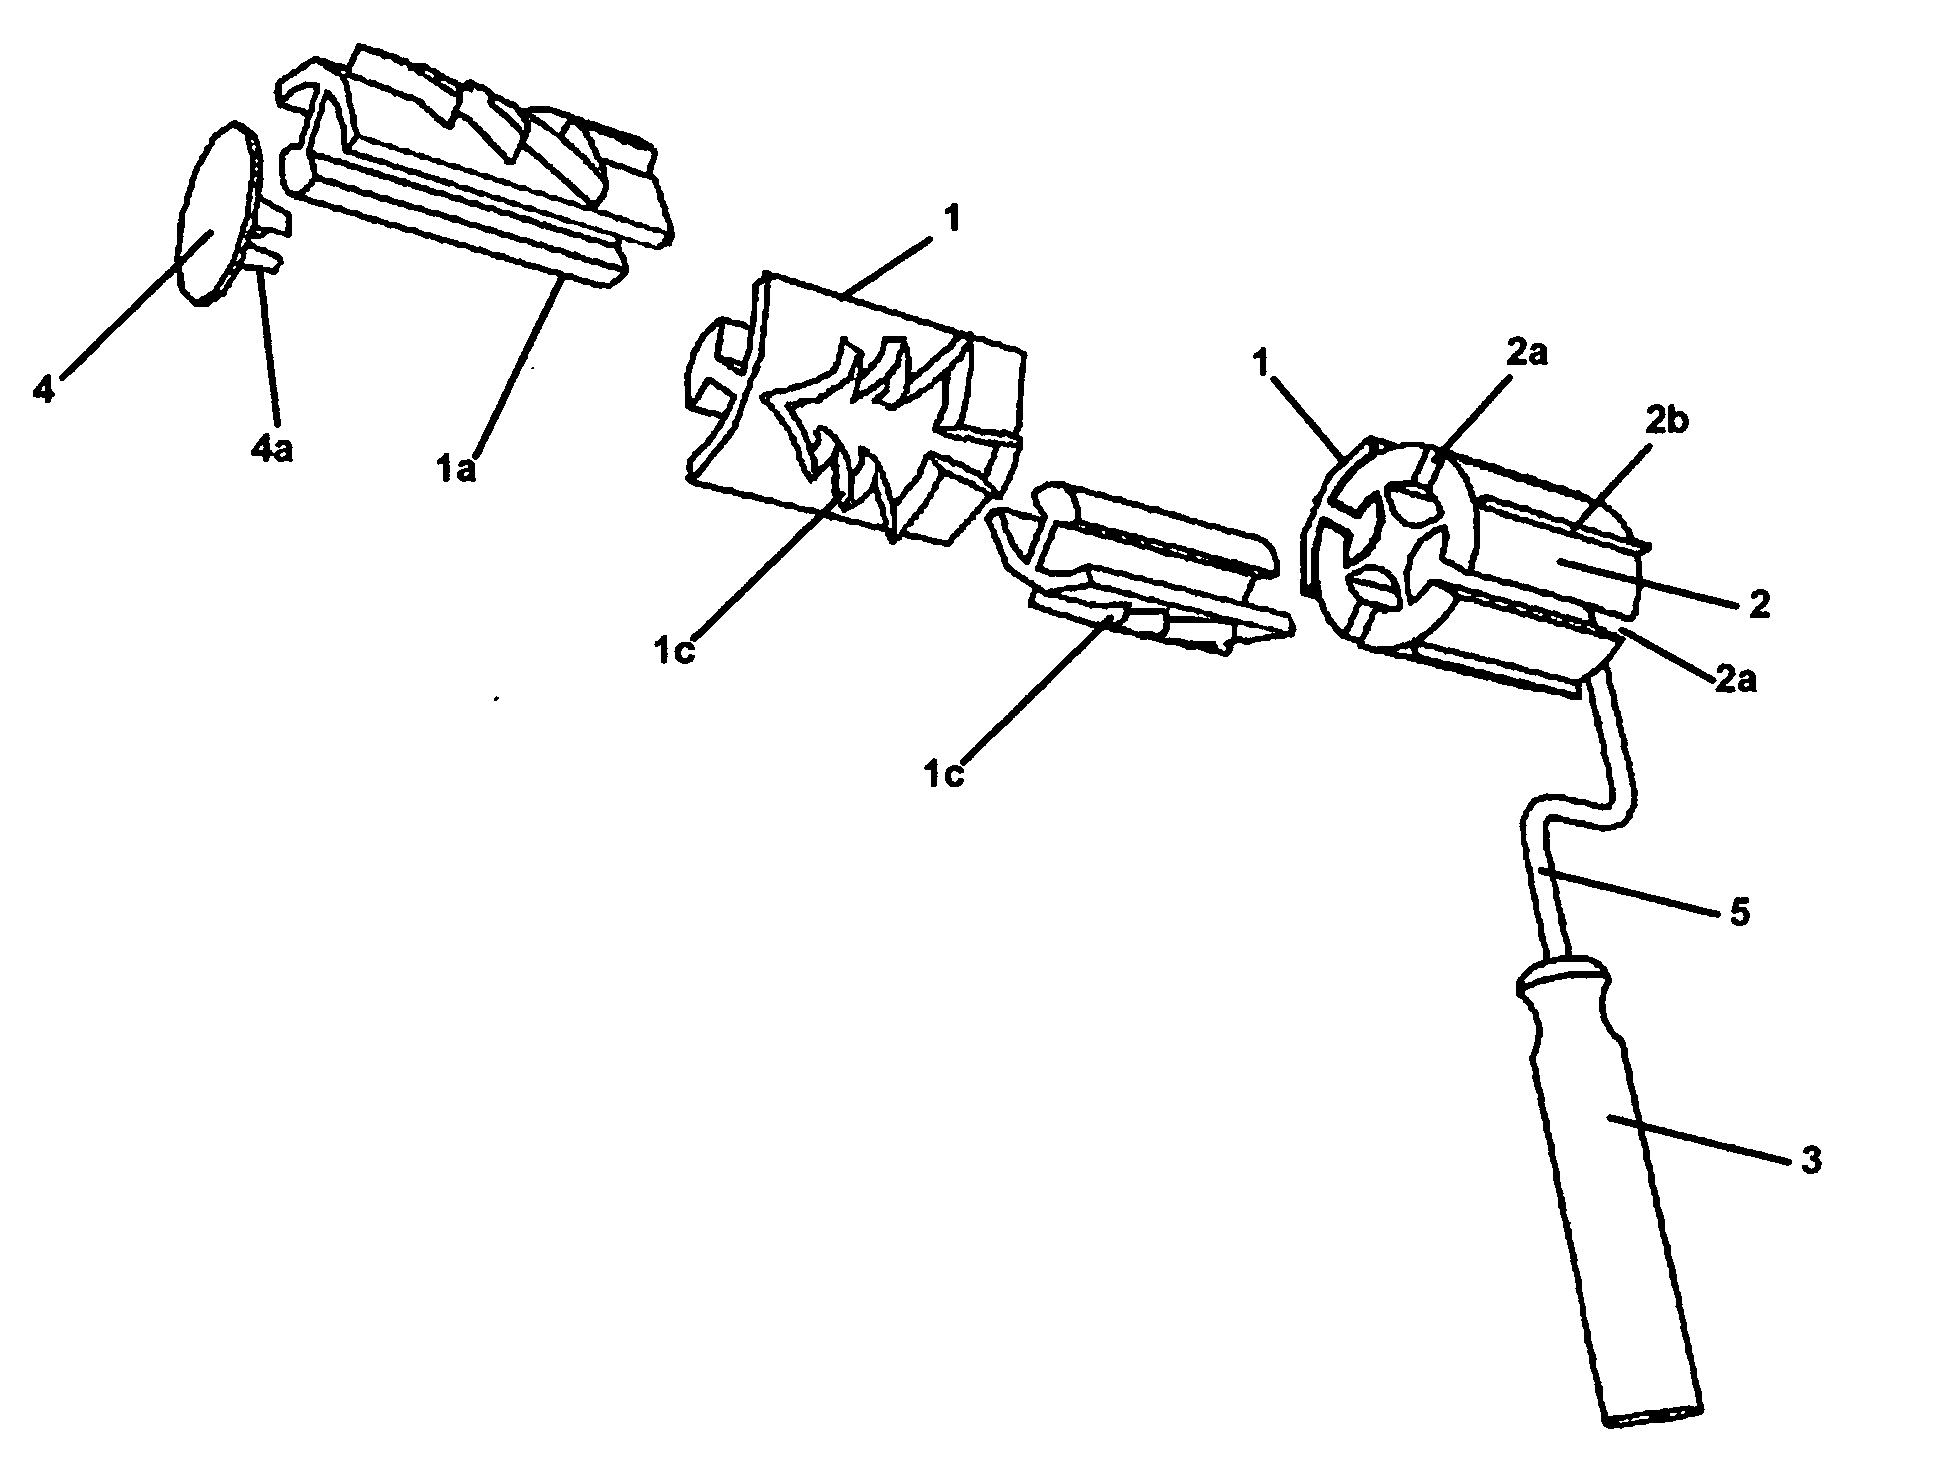 Rolling pastry cutter kit with interchangeable pastry cutting units and method of use thereof